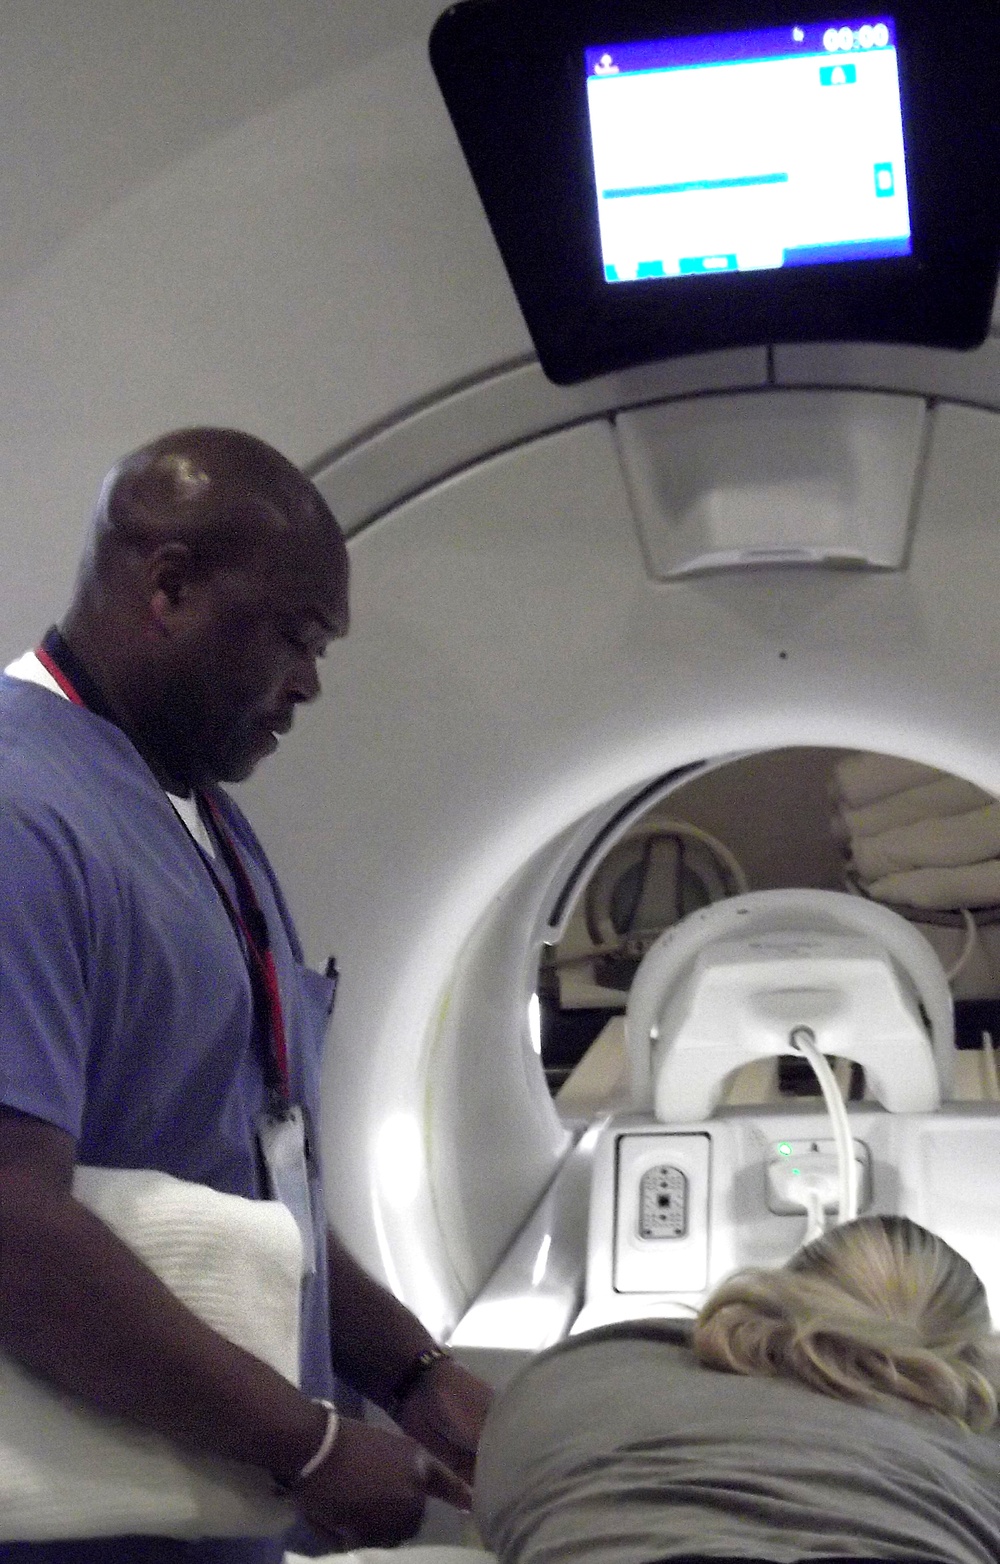 MRI duo say trust is an important workplace ingredient